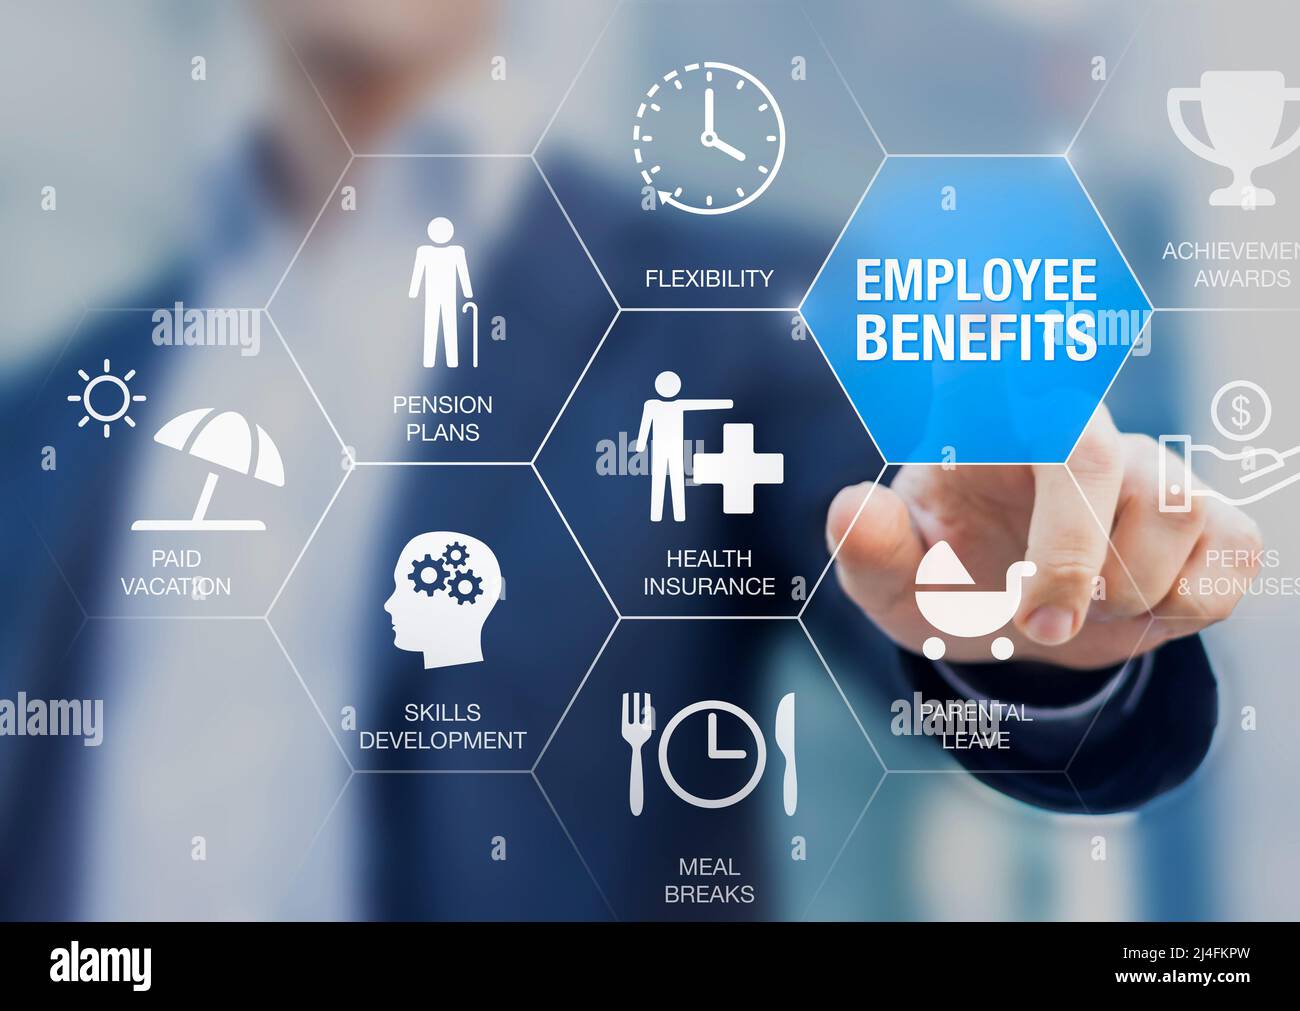 Employee benefits compensation package with health insurance, paid vacation, pension plans, parental leave, perks and bonuses. Payroll reward manageme Stock Photo